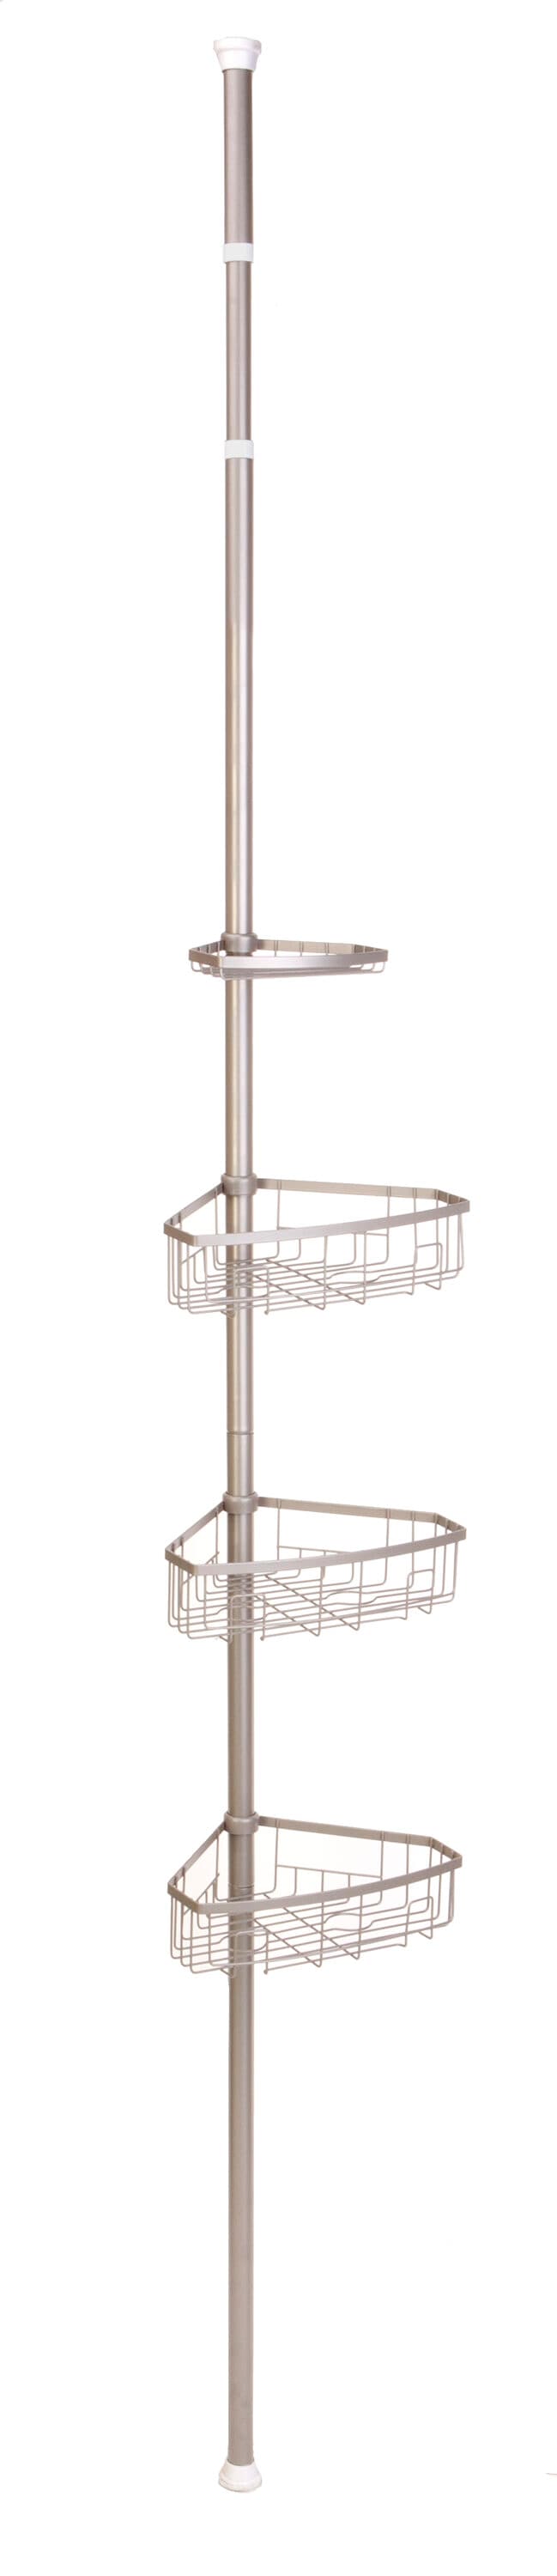 Style Selections White Steel 4-Shelf Tension Pole Freestanding